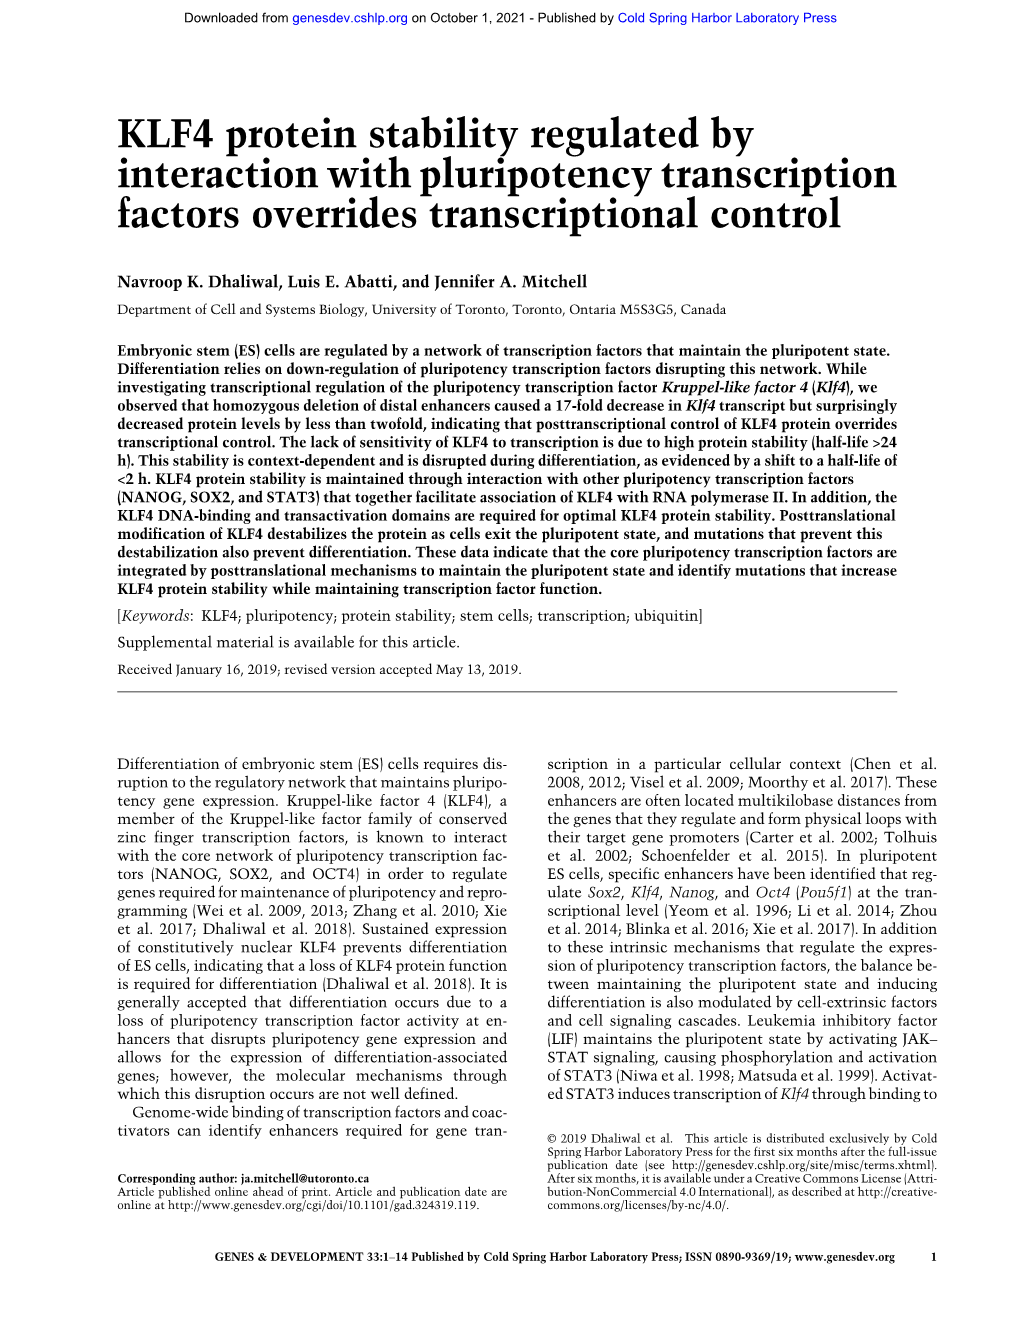 KLF4 Protein Stability Regulated by Interaction with Pluripotency Transcription Factors Overrides Transcriptional Control